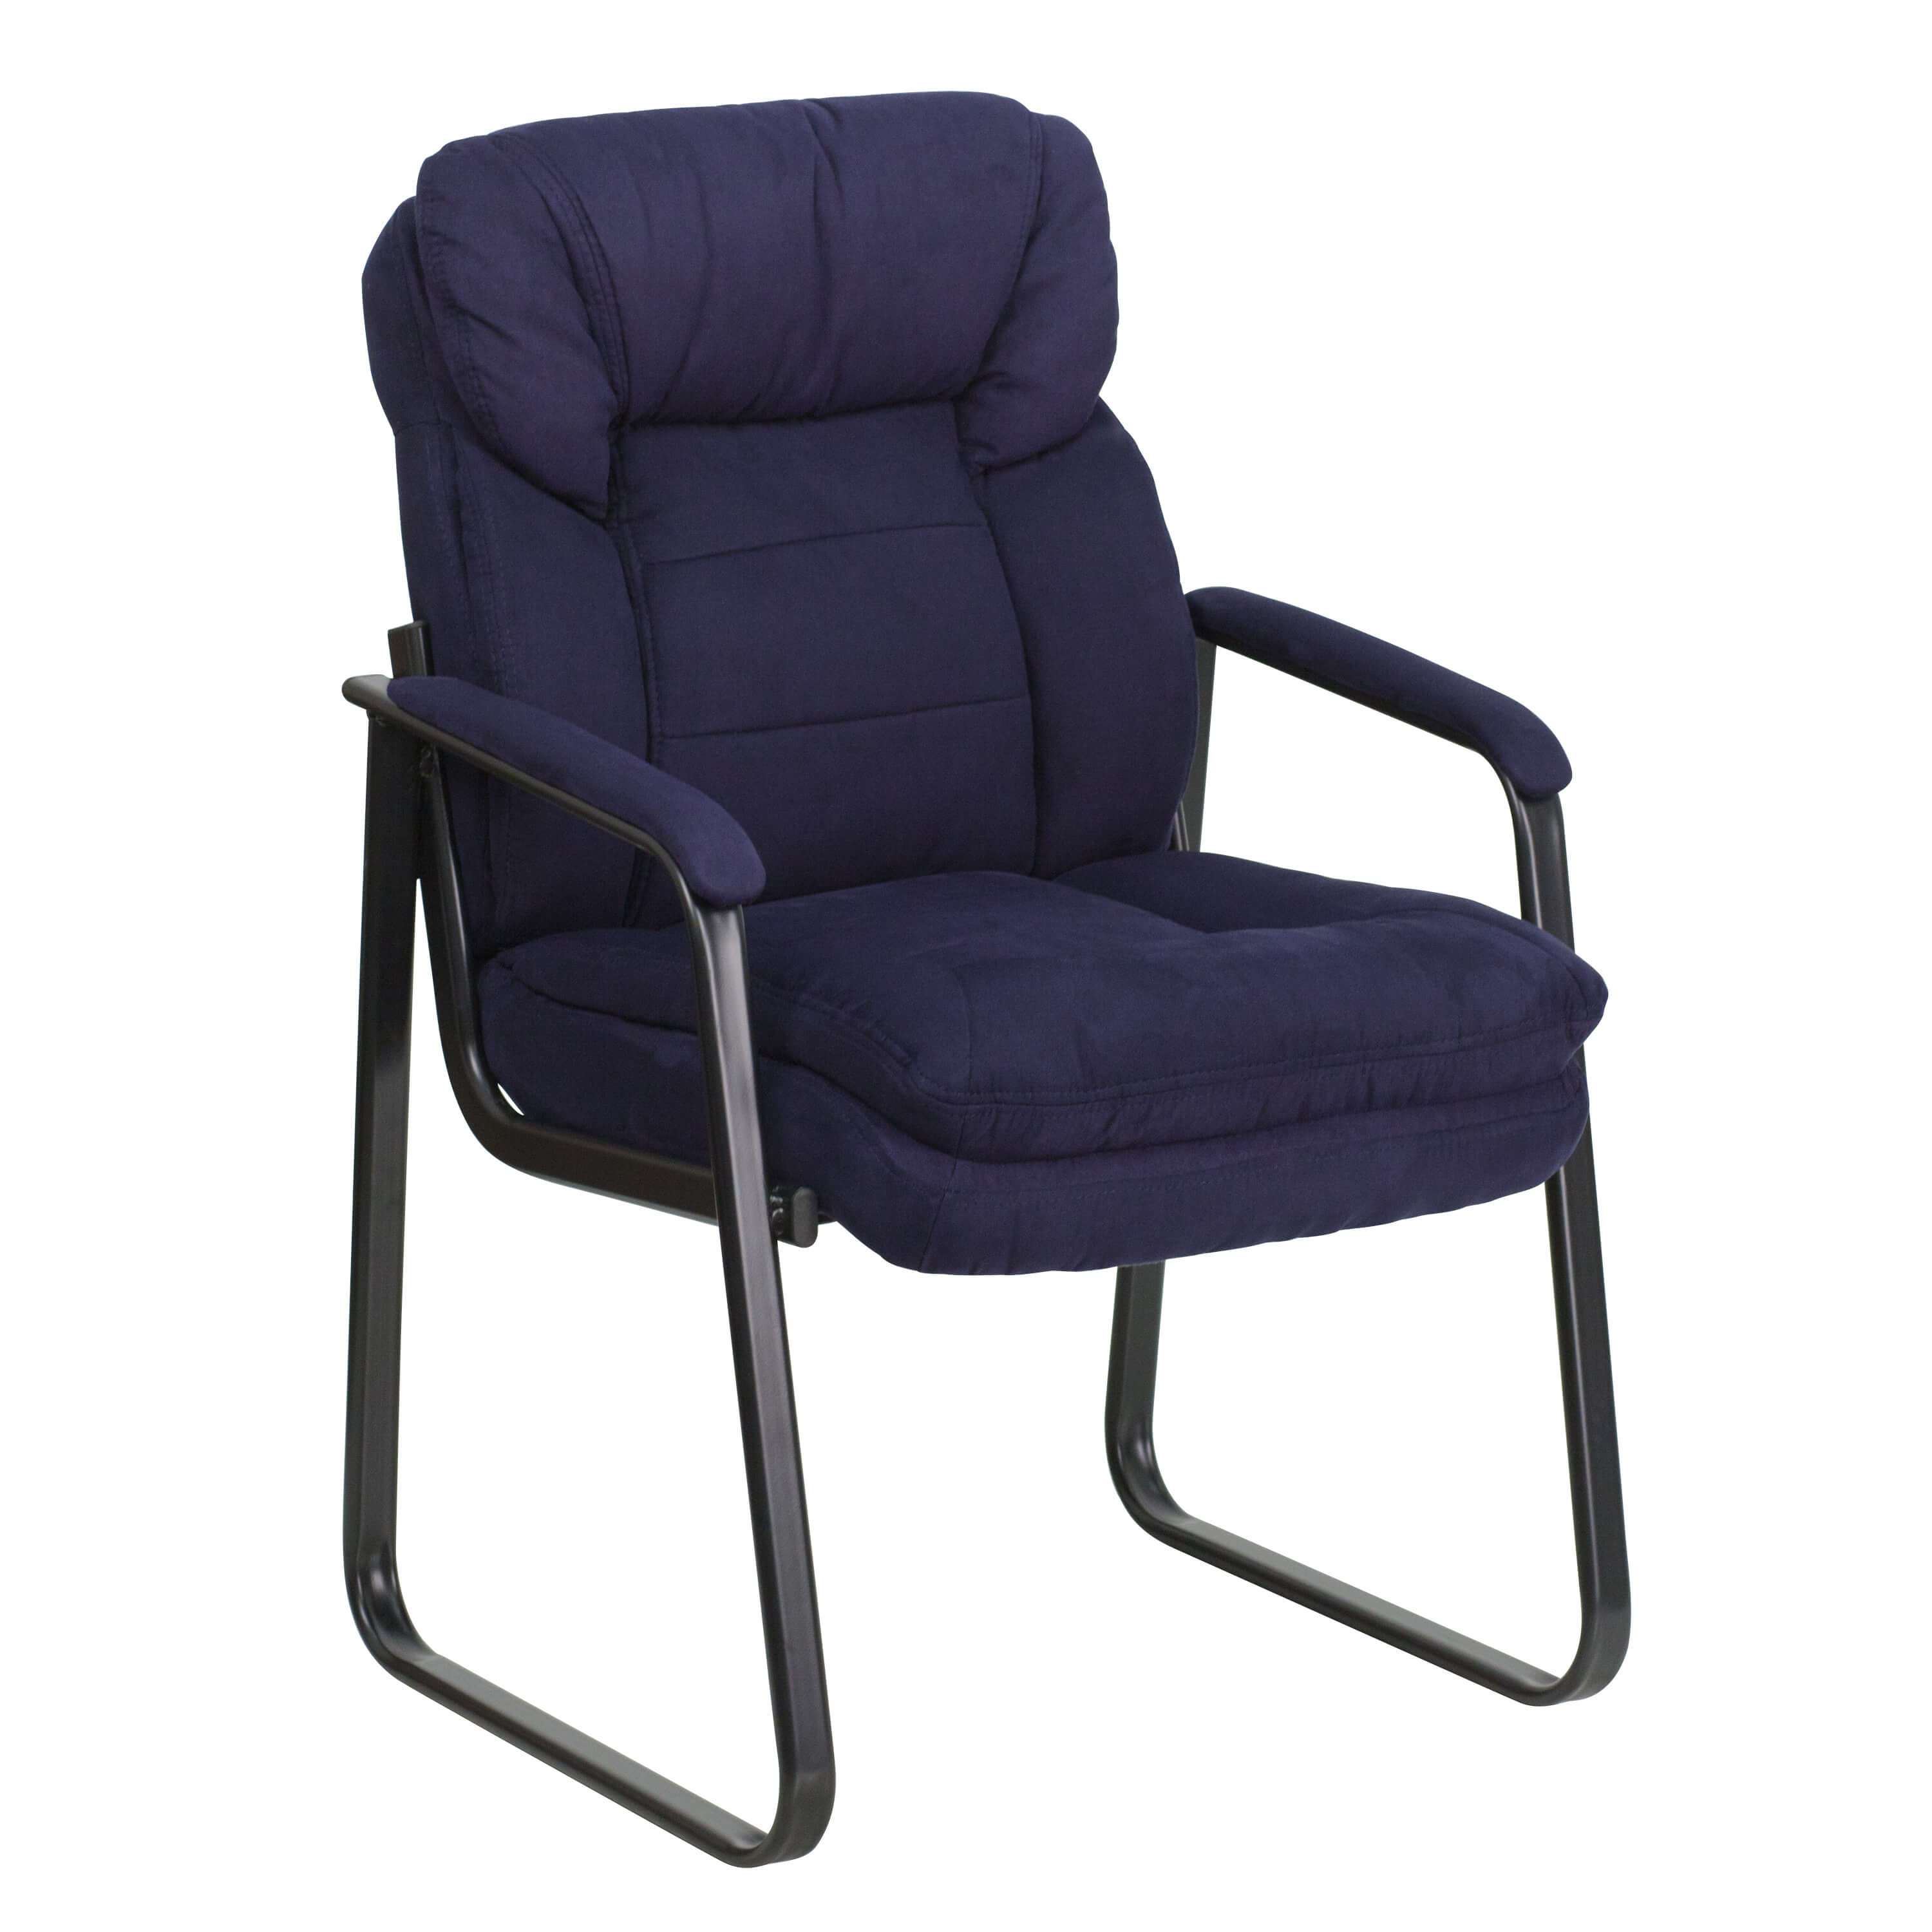 Side chairs with arms CUB GO 1156 NVY GG ALF